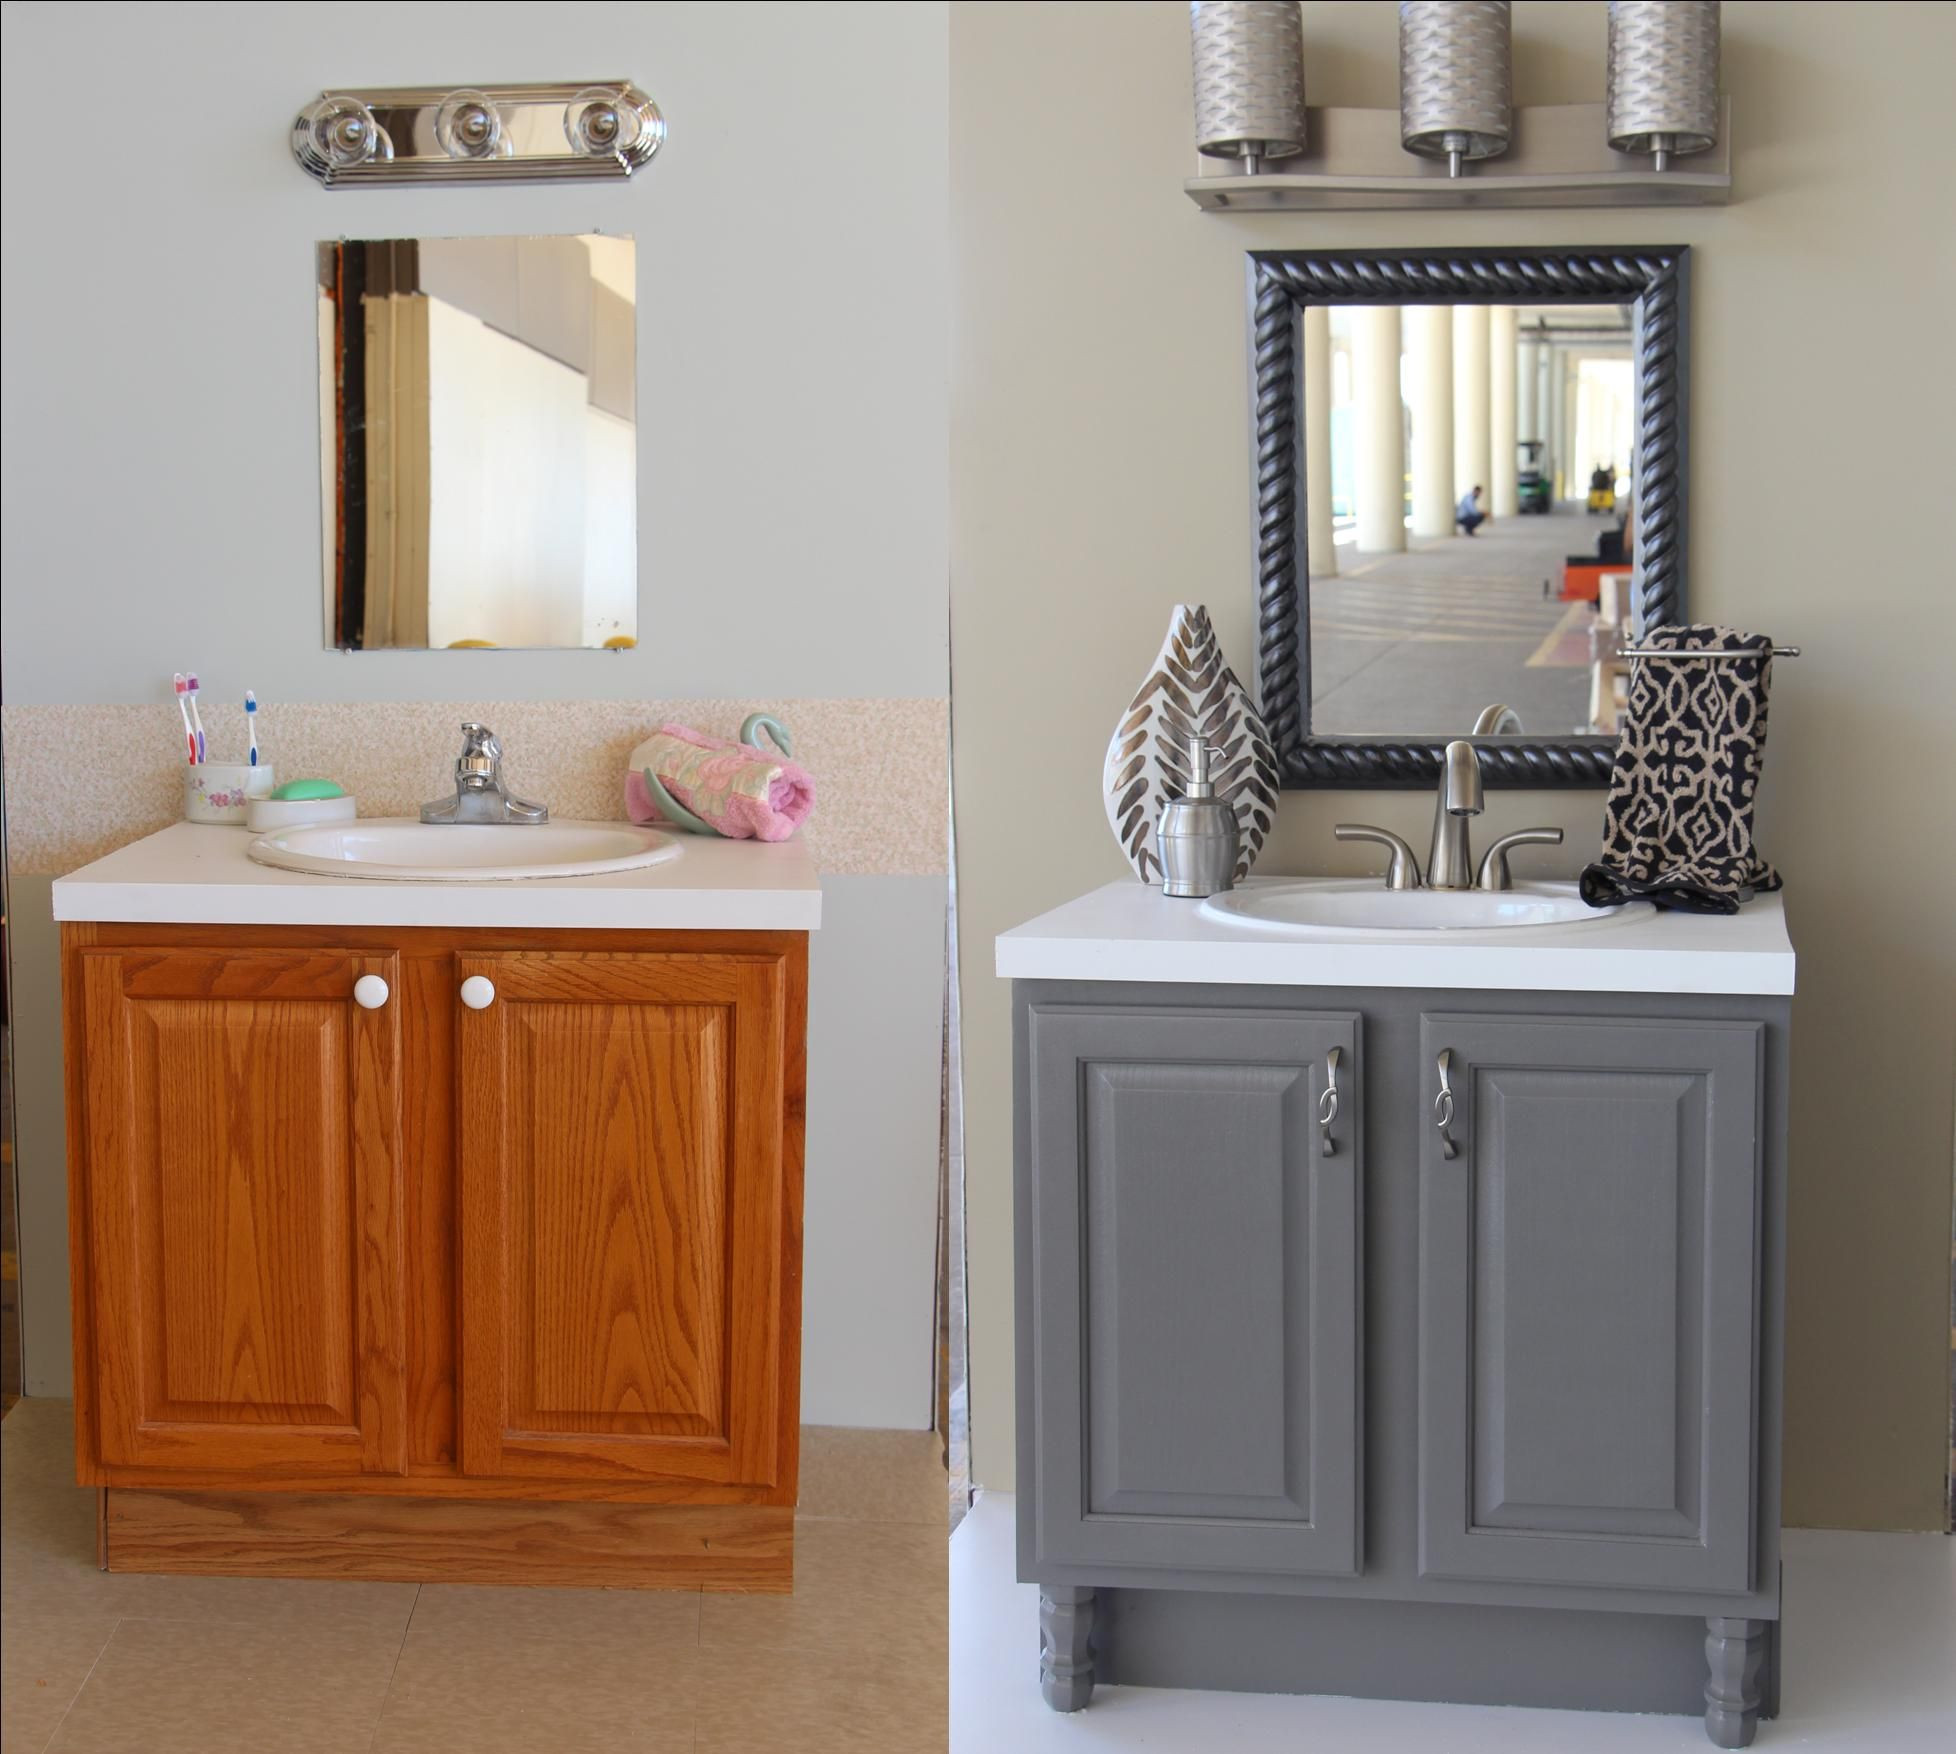 Repaint Bathroom Cabinet
 Bathroom Updates You Can Do This Weekend